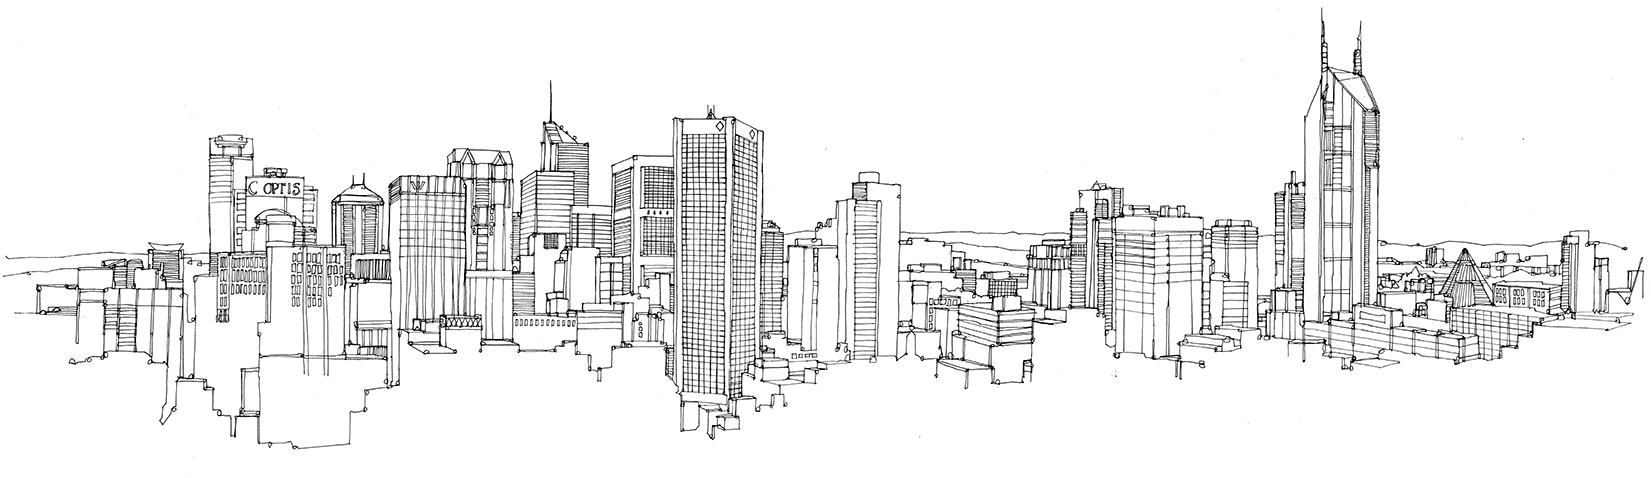 city silhouette drawing